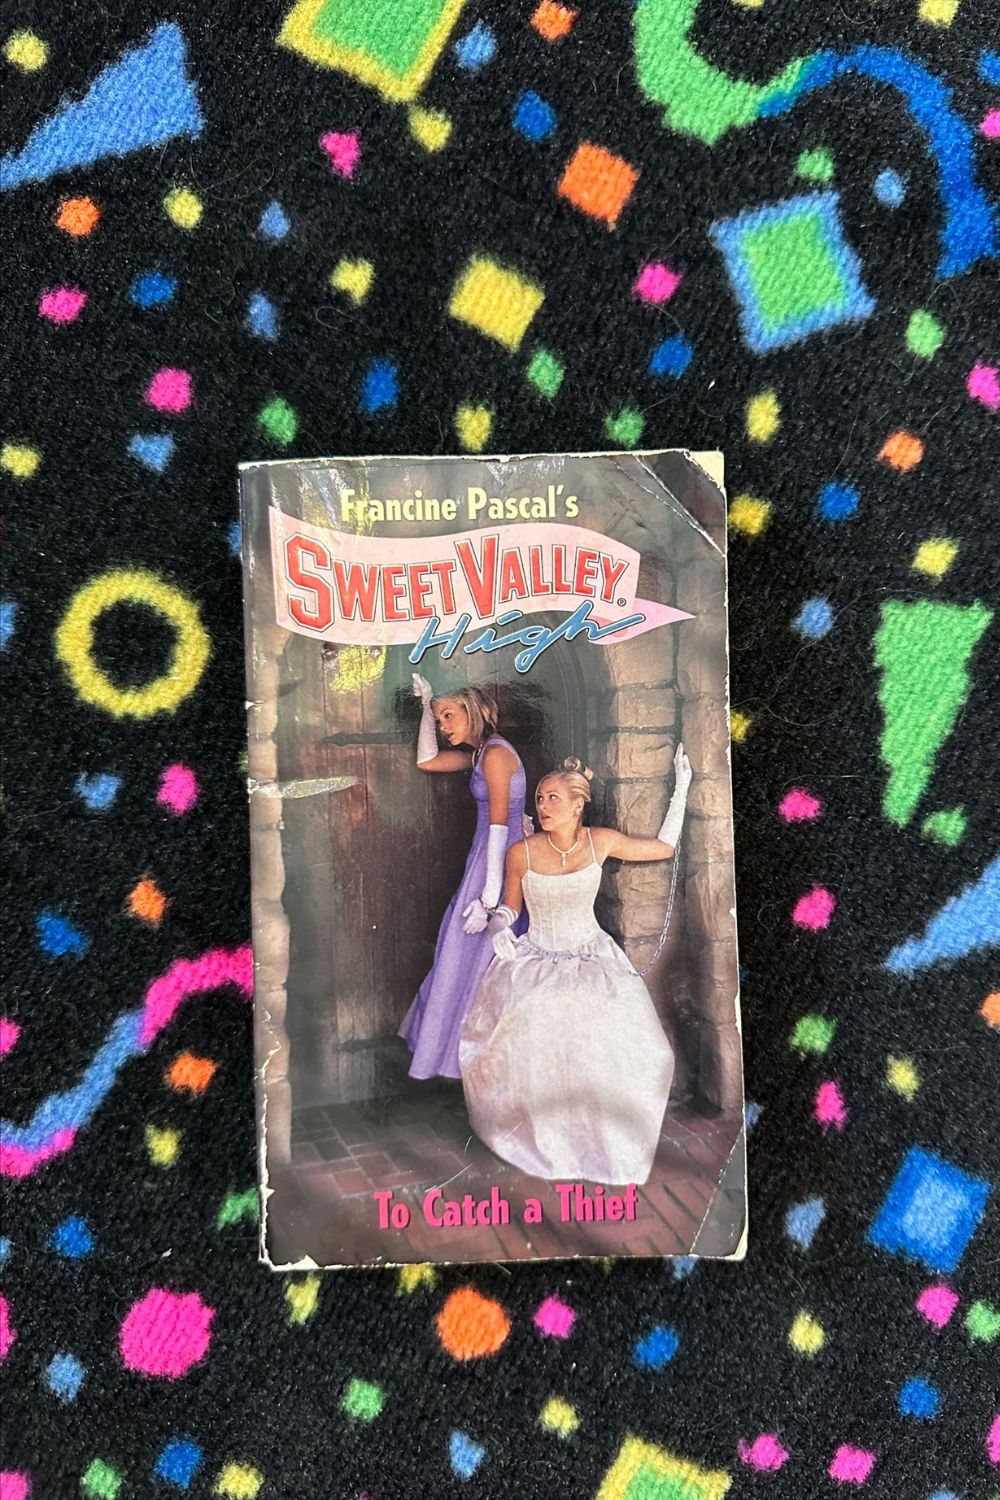 SWEET VALLEY HIGH- "TO CATCH A THIEF" BOOK*